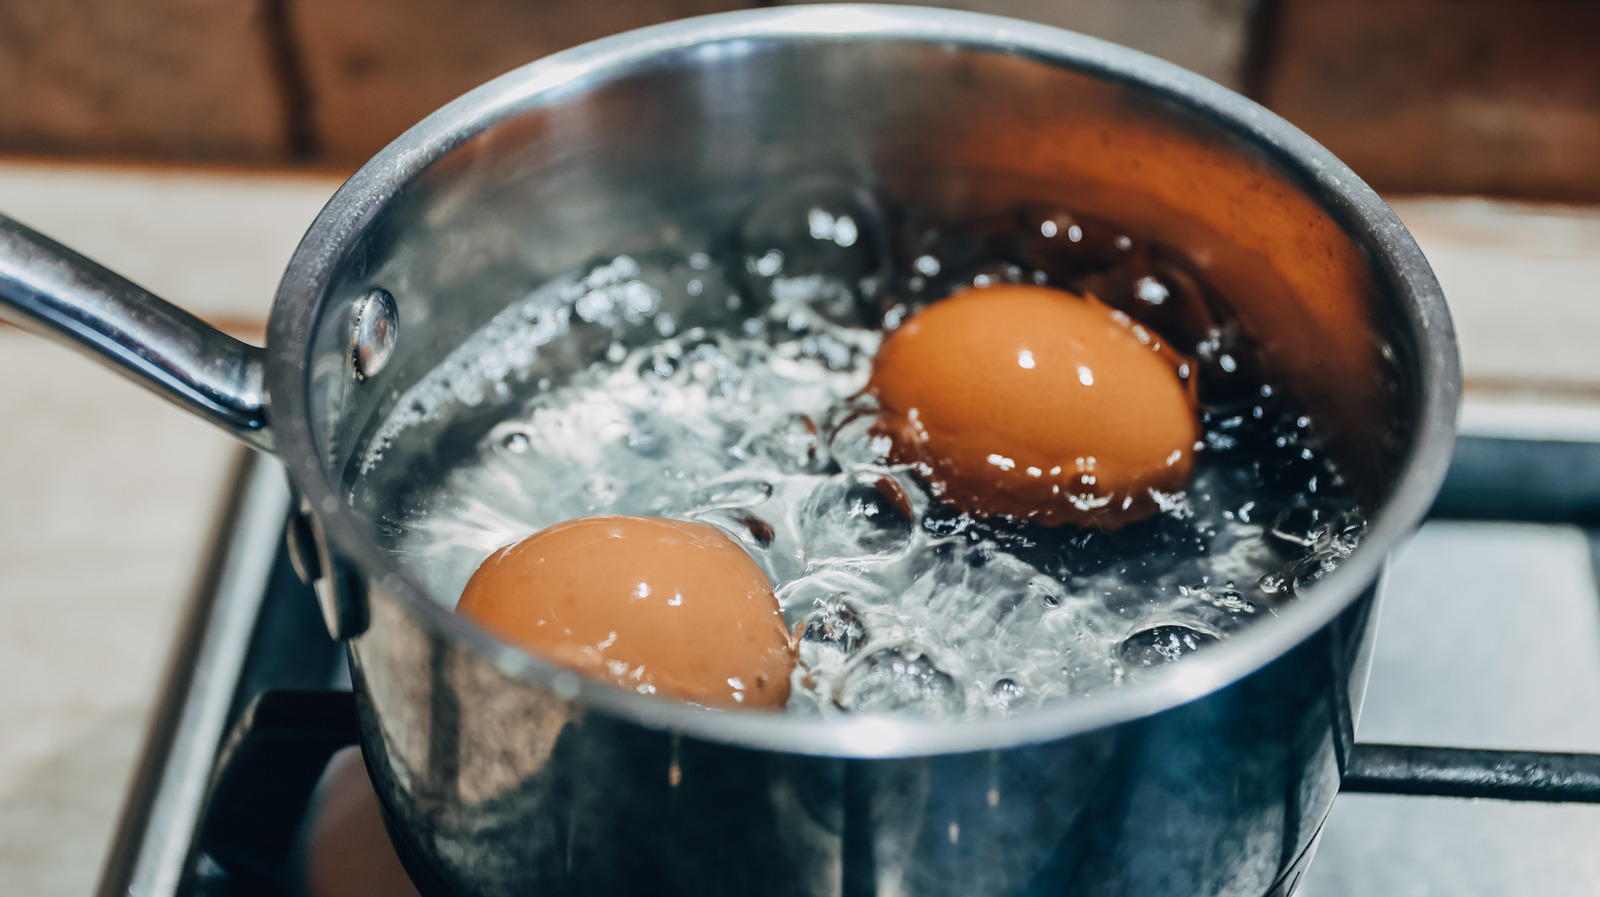 https://www.mashed.com/img/gallery/the-adorable-kitchen-gadget-that-ensures-perfect-hard-boiled-eggs-with-no-effort/l-intro-1684254374.jpg